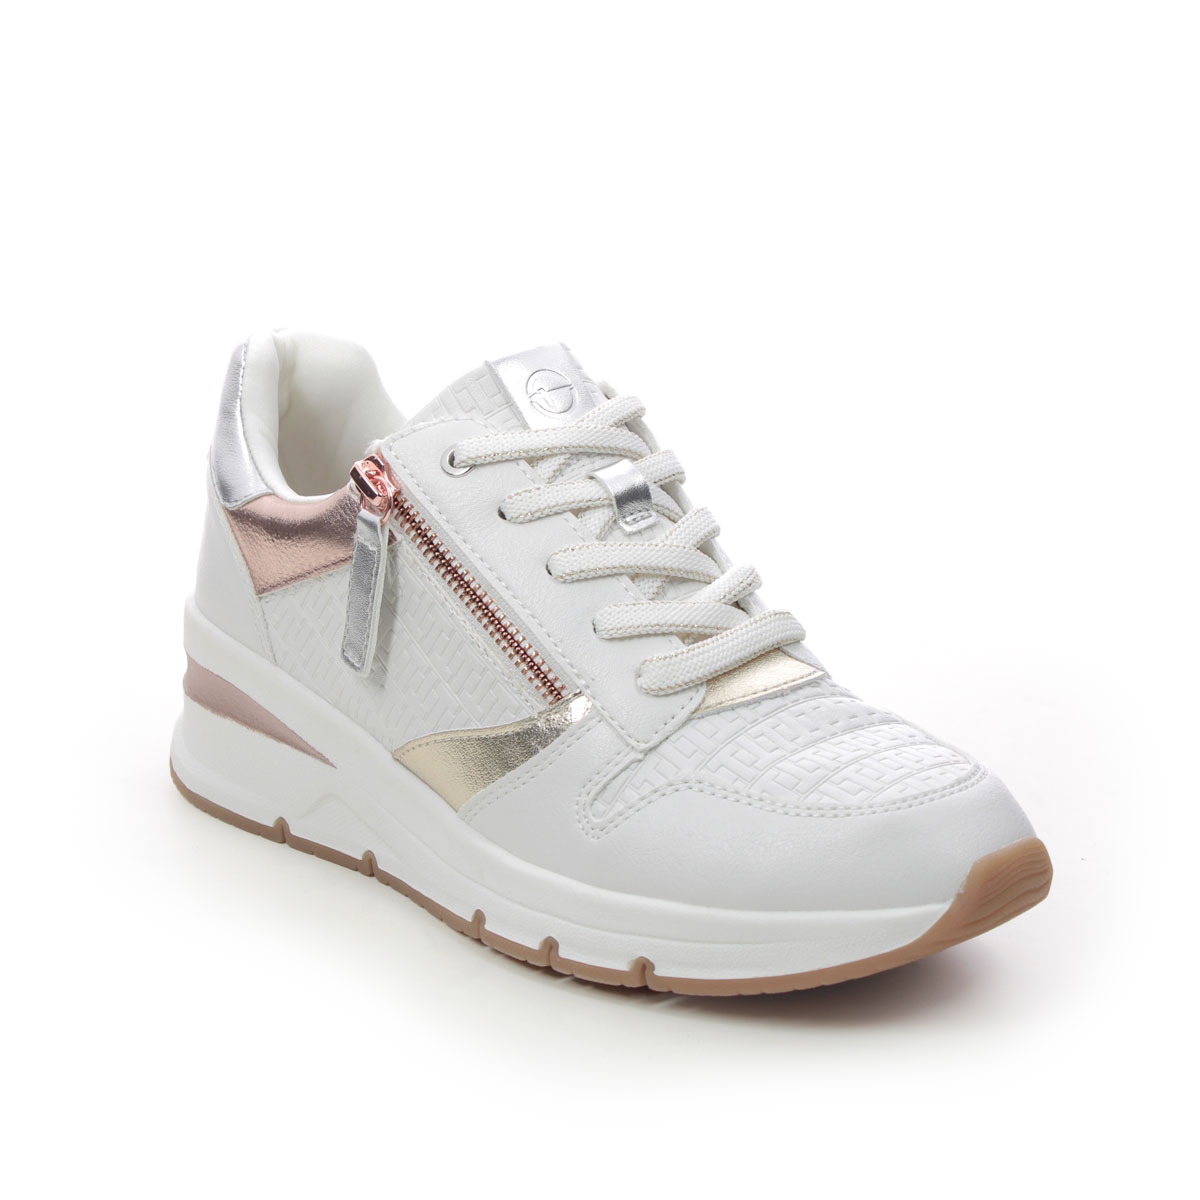 Tamaris Rea Zip Wedge White Rose Gold Womens Trainers 23702-20-157 In Size 38 In Plain White Rose Gold